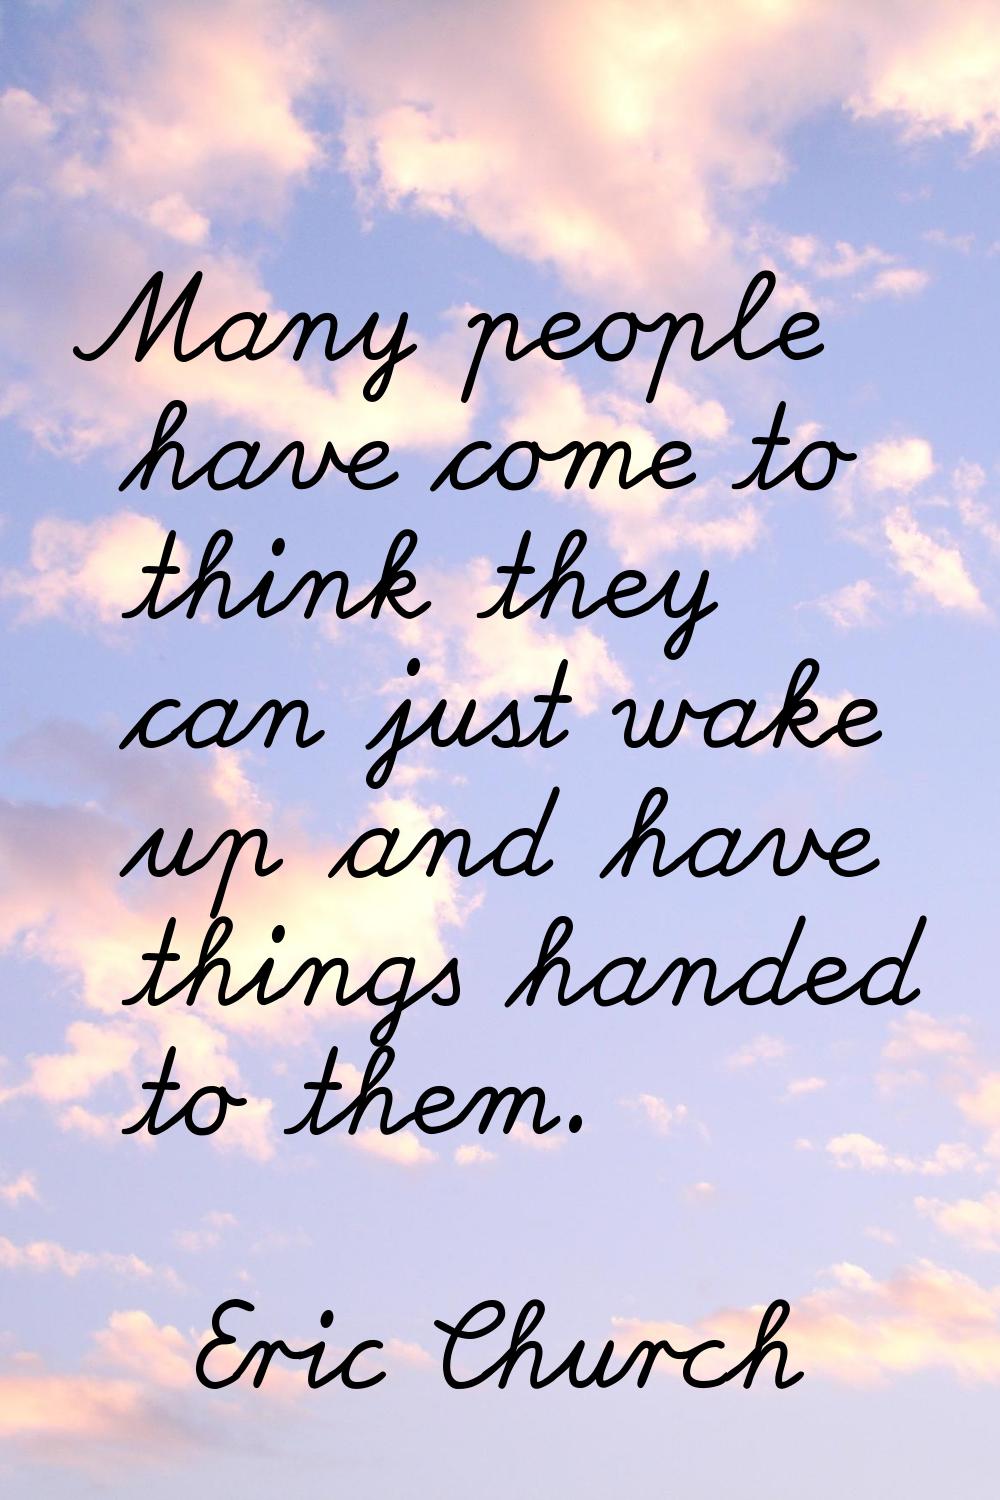 Many people have come to think they can just wake up and have things handed to them.